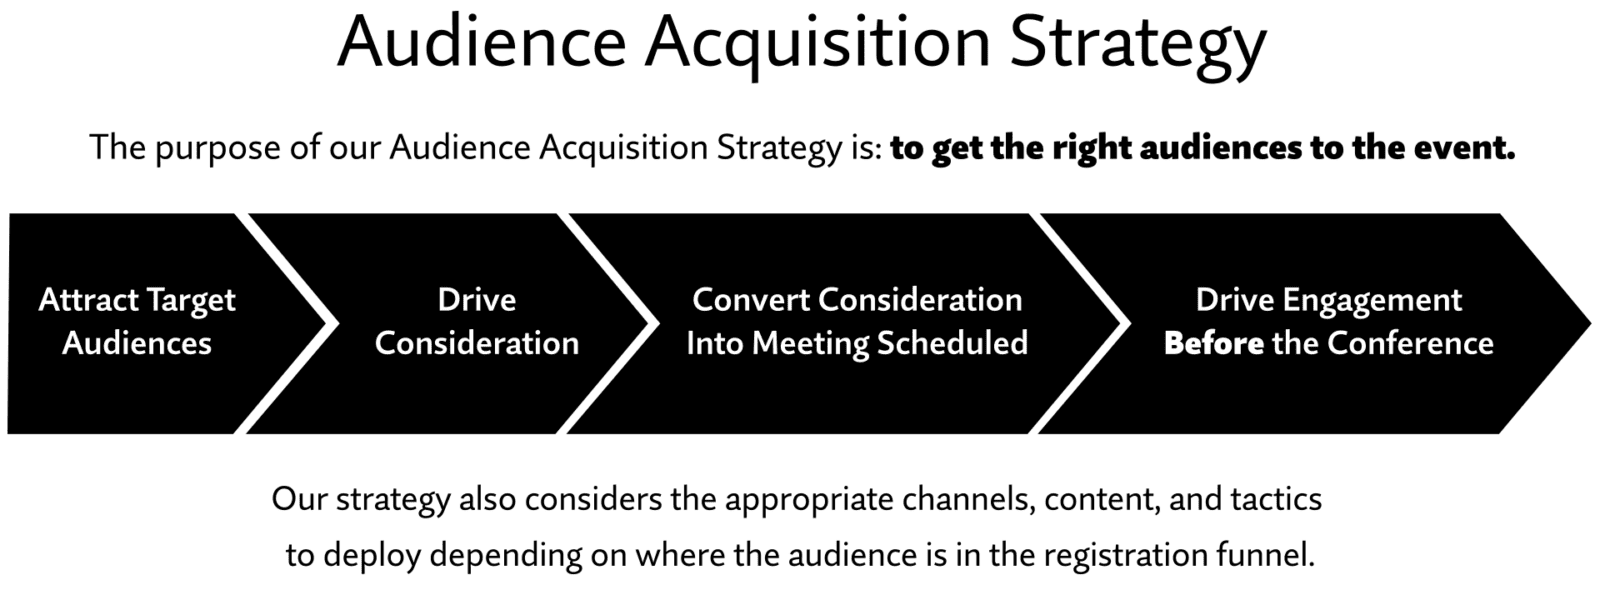 Audience Acquisition Strategy